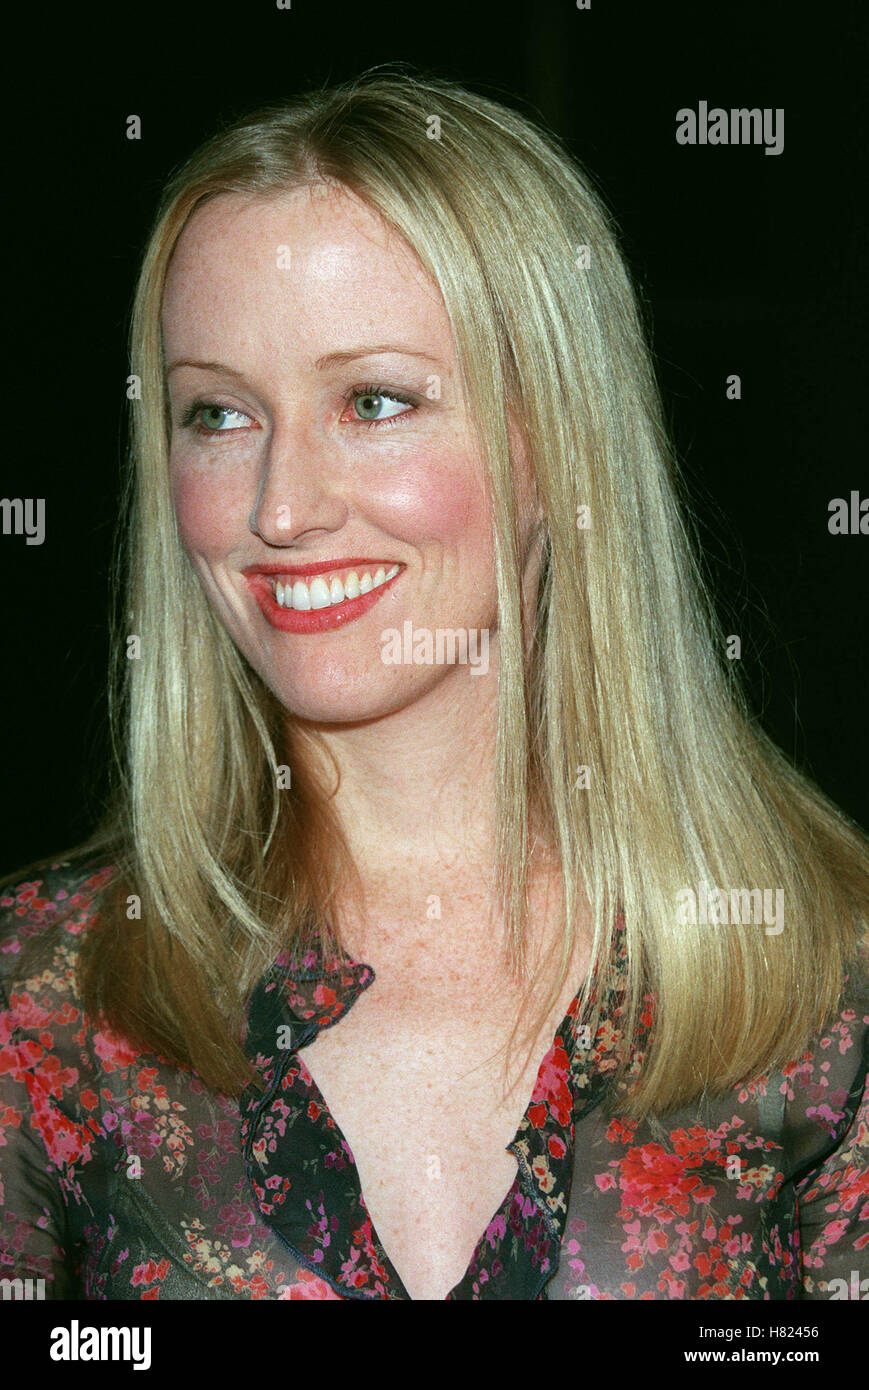 JANELL MCLEOD 'THE GIFT' FILM PREMIERE 18 December 2000 Stock Photo